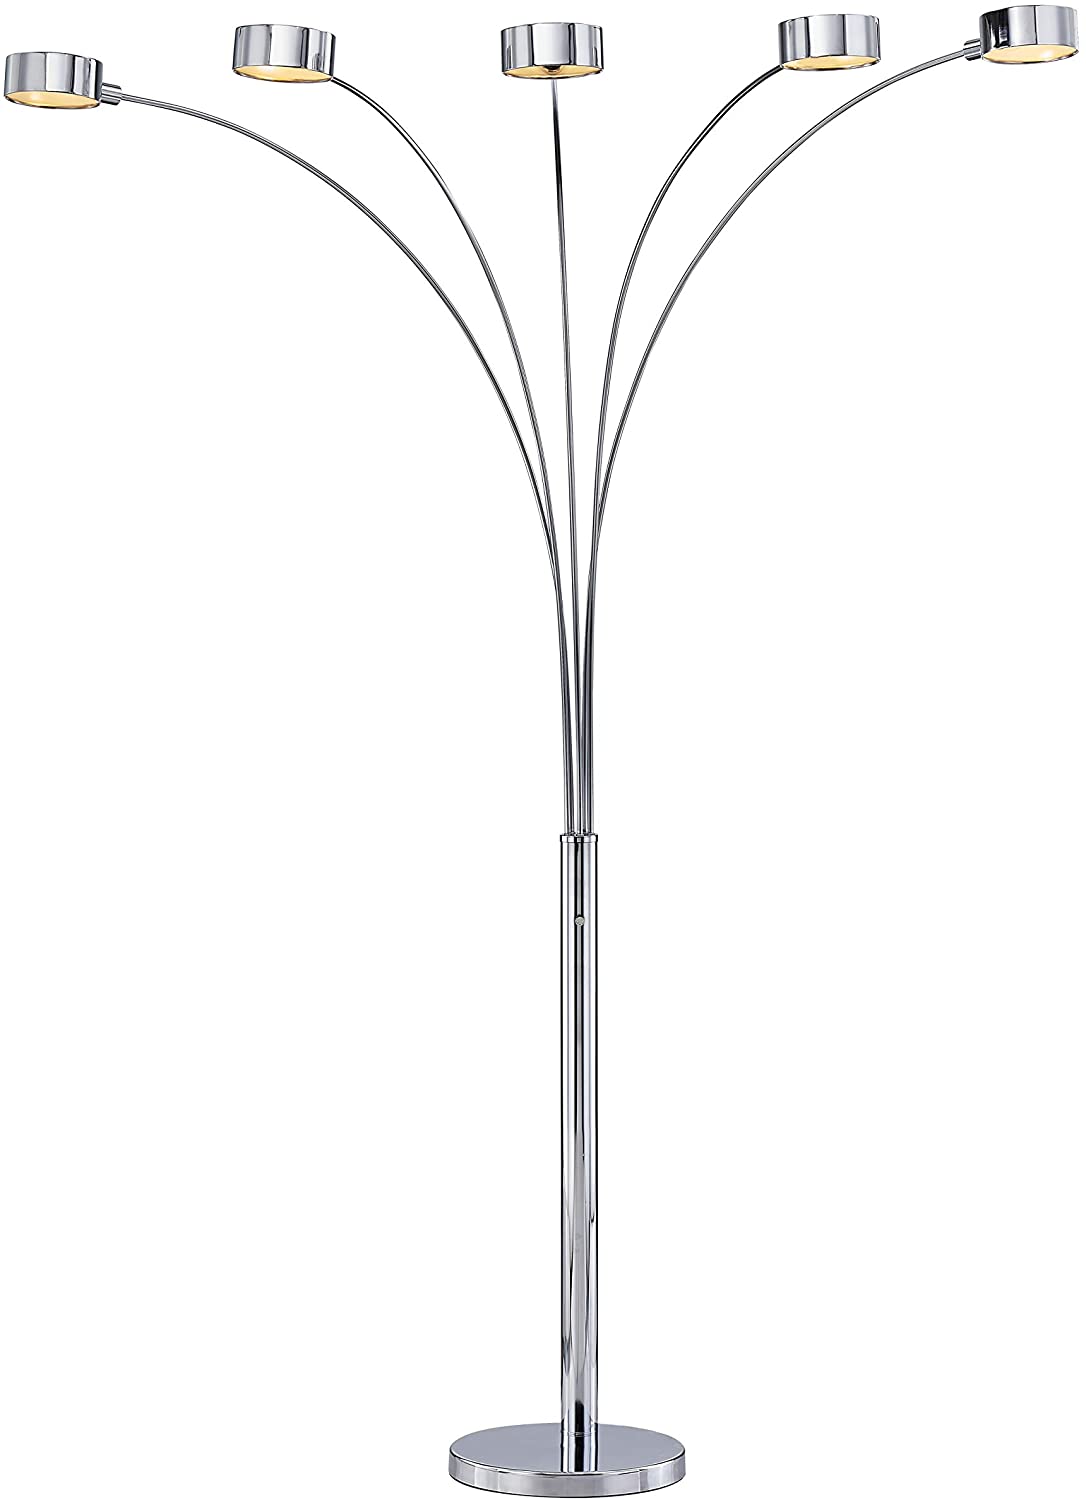 5 Arc Brushed Steel Floor Lamp w/ Dimmer Switch, 360 Degree Rotatable Shades - Dim Options - Stainless Steel